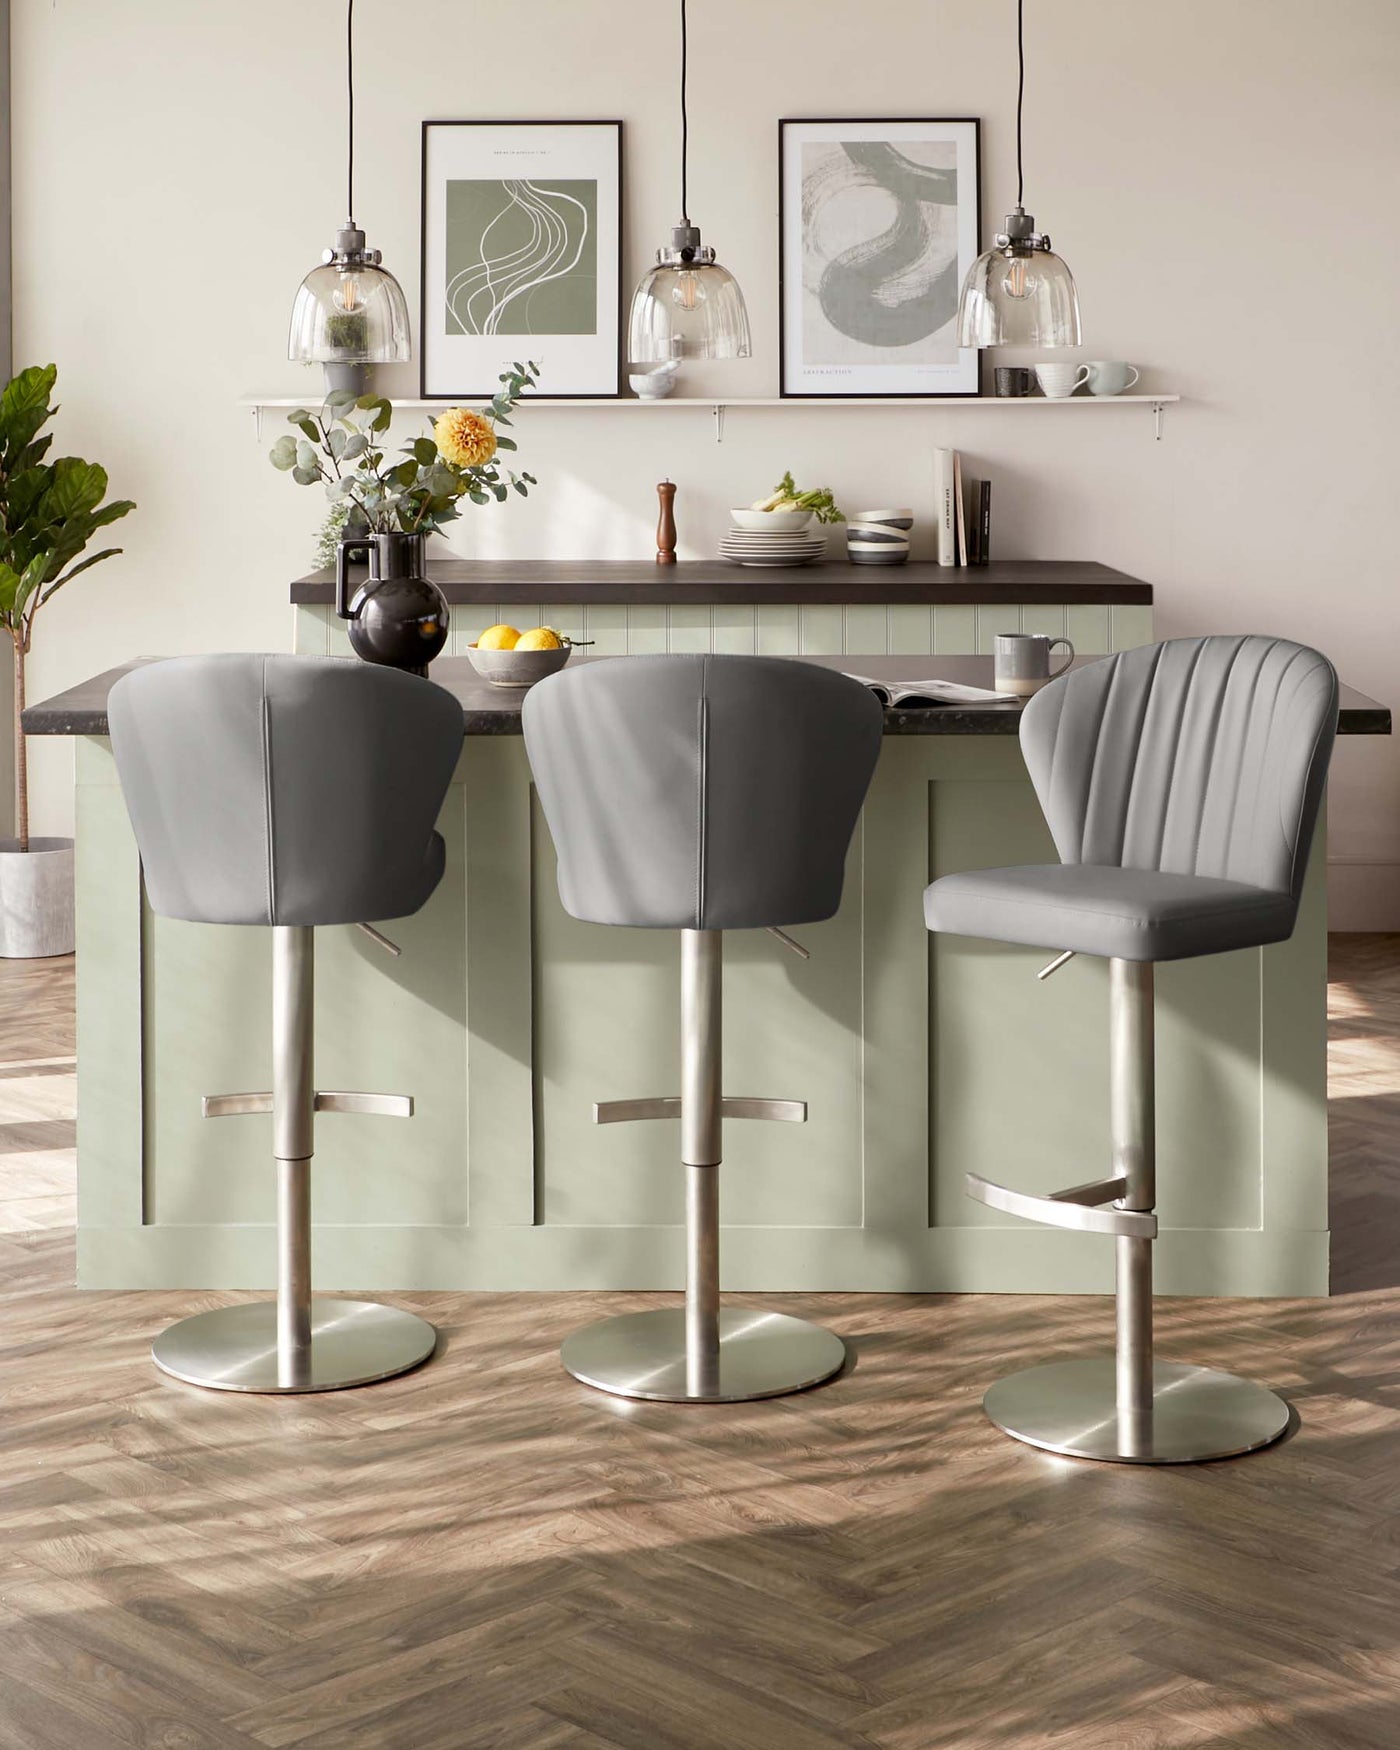 Three modern grey upholstered bar stools with tufted backrests and adjustable stainless steel bases, positioned around a light green kitchen island.